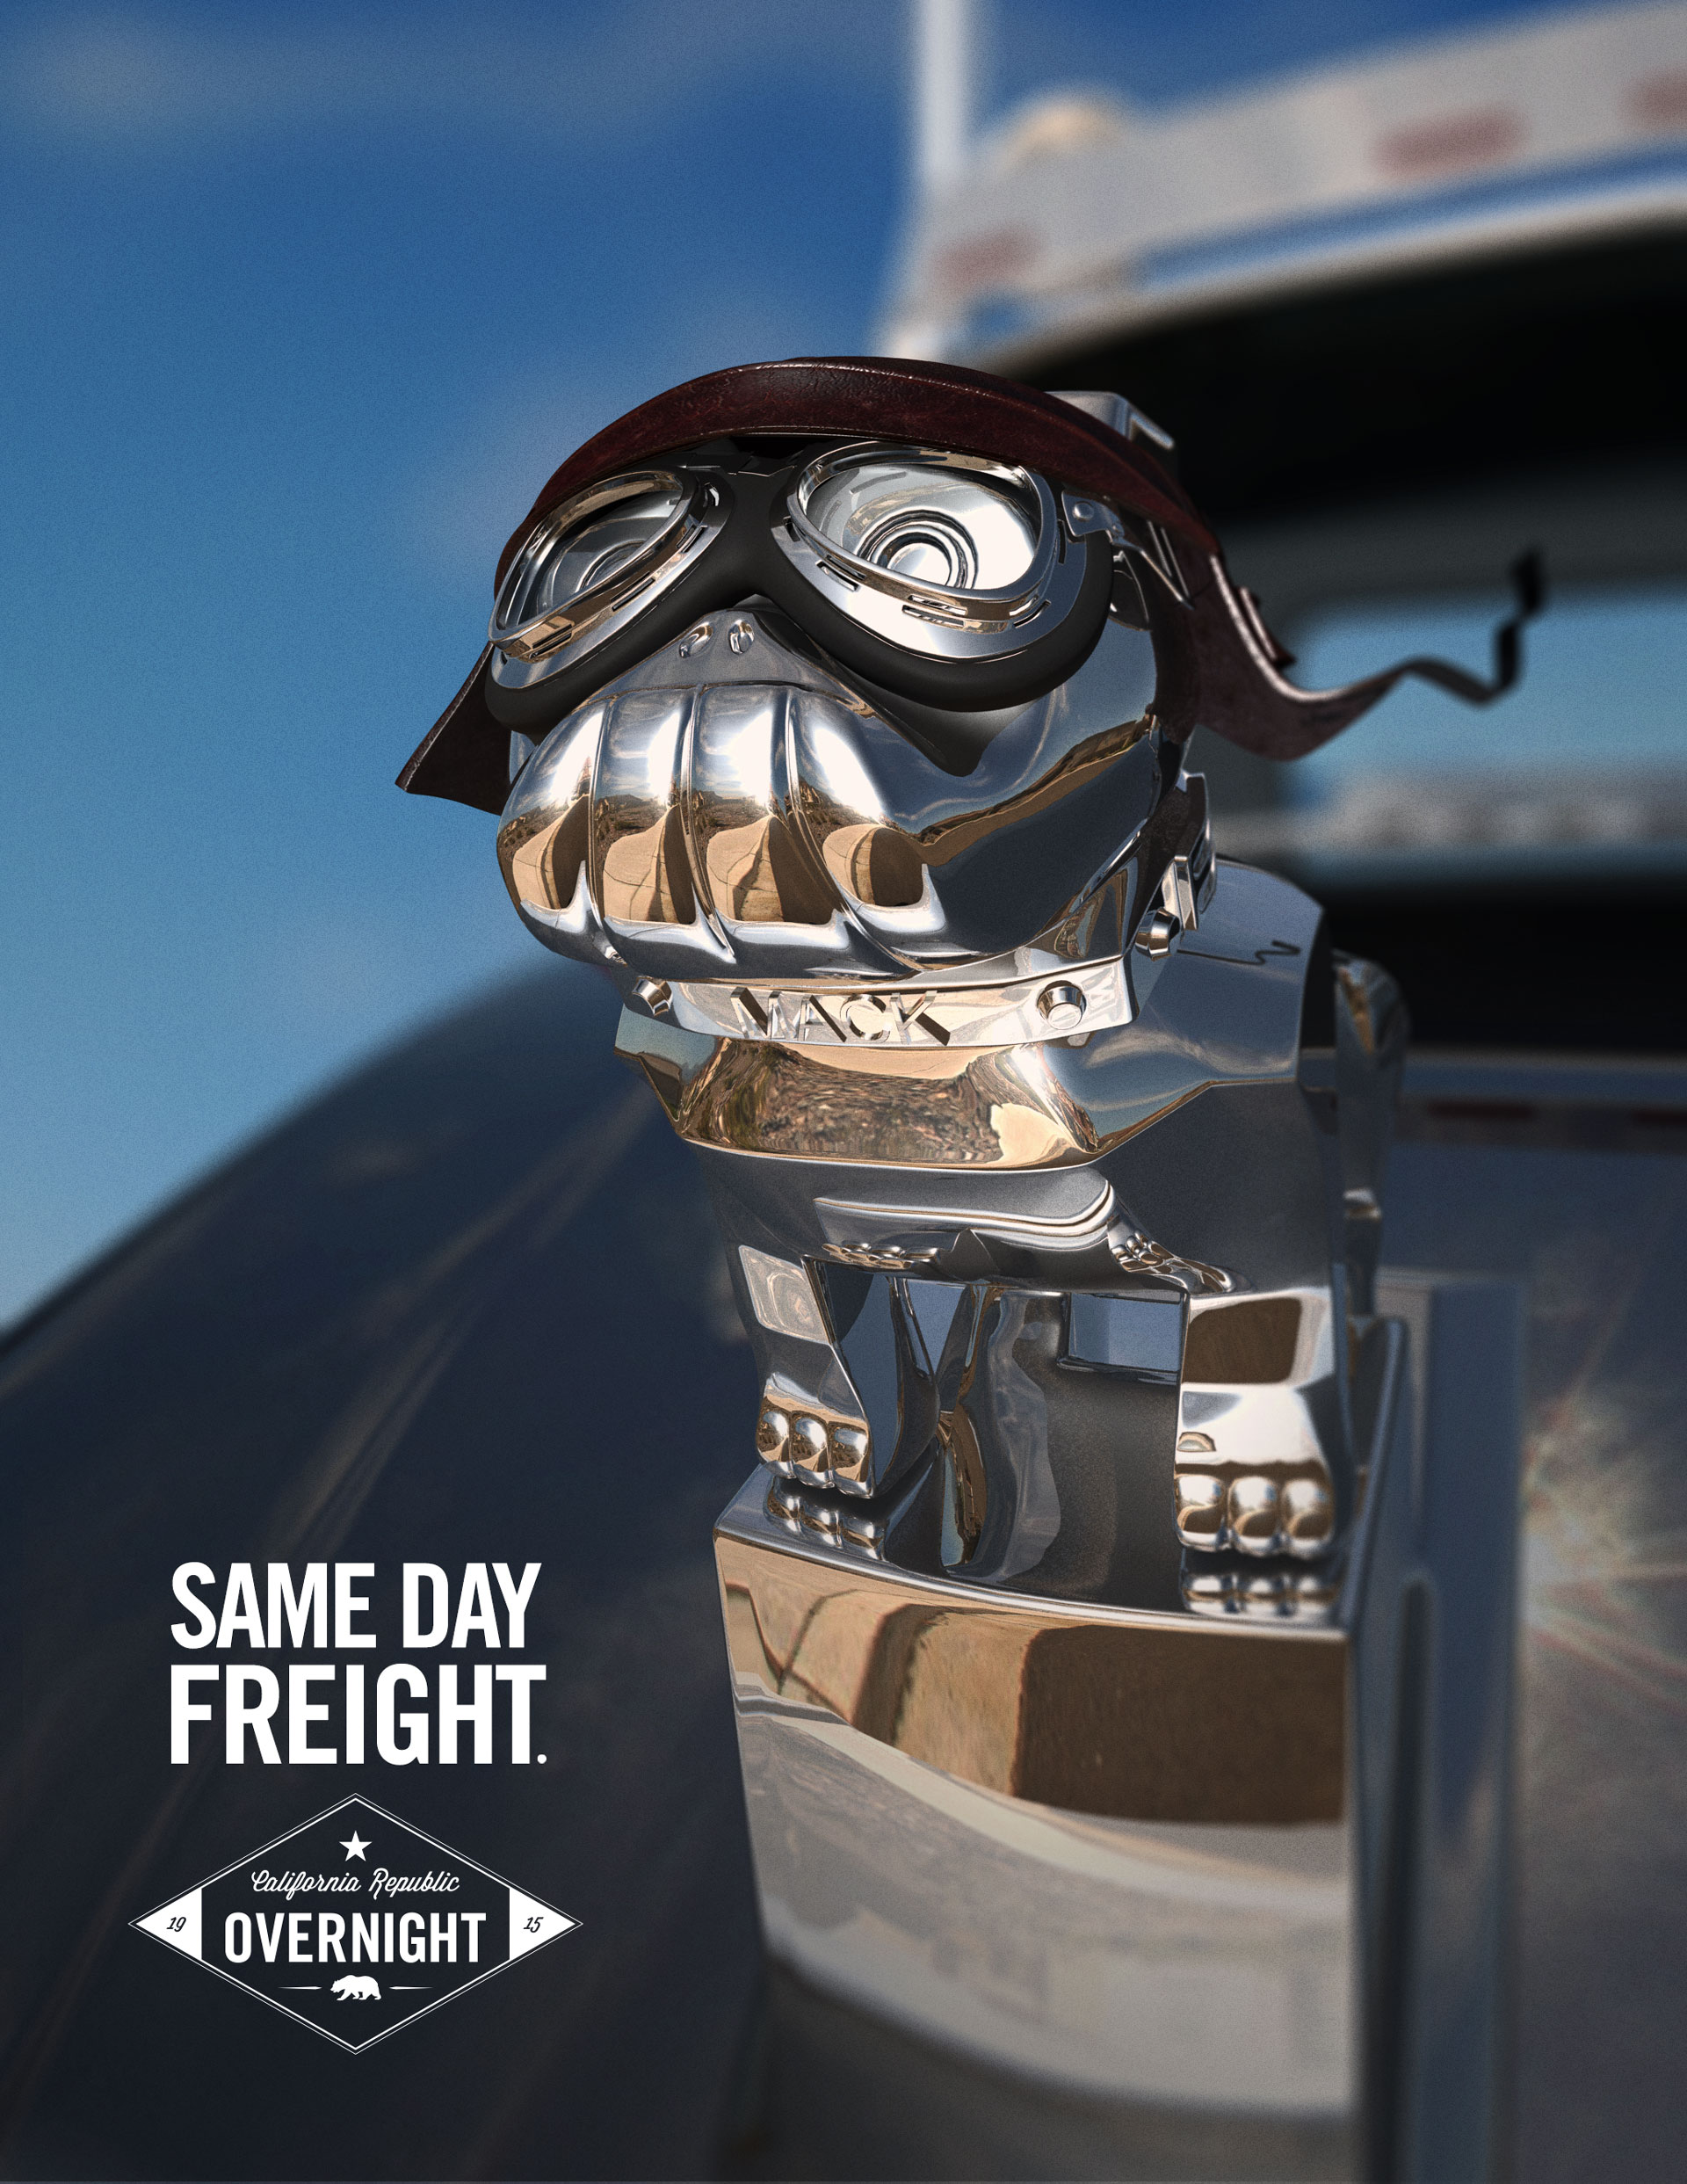 California Republic Overnight, Same Day Freight - Ad by Tidal Wave